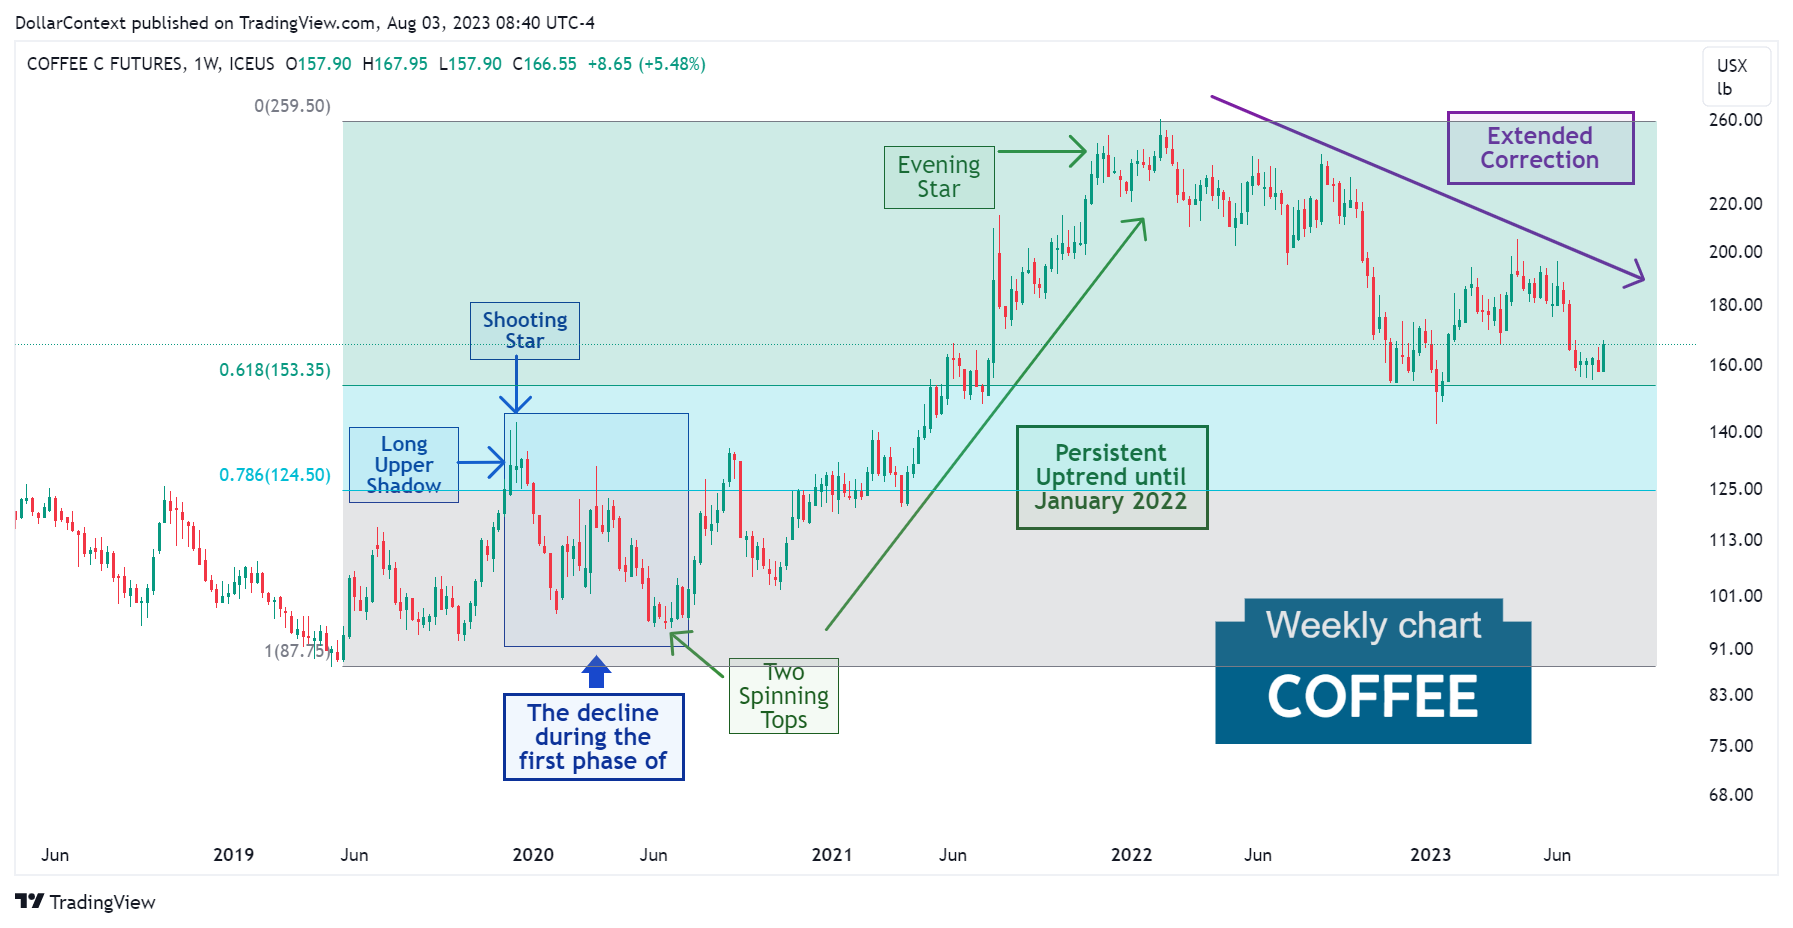 Coffee Futures: Retracement During 2022 and the First Half of 2023